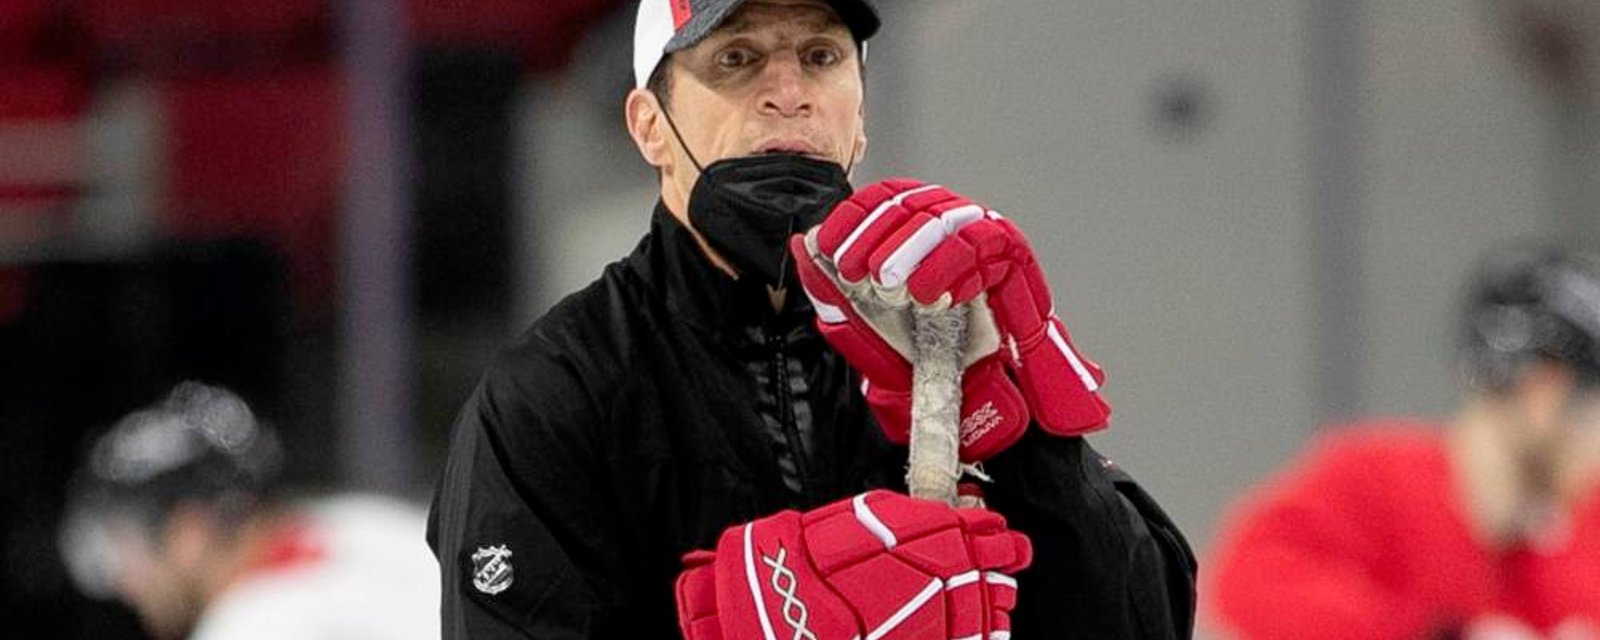 Brind'Amour finally re-signs with Carolina, taking himself off the free agent coaching market